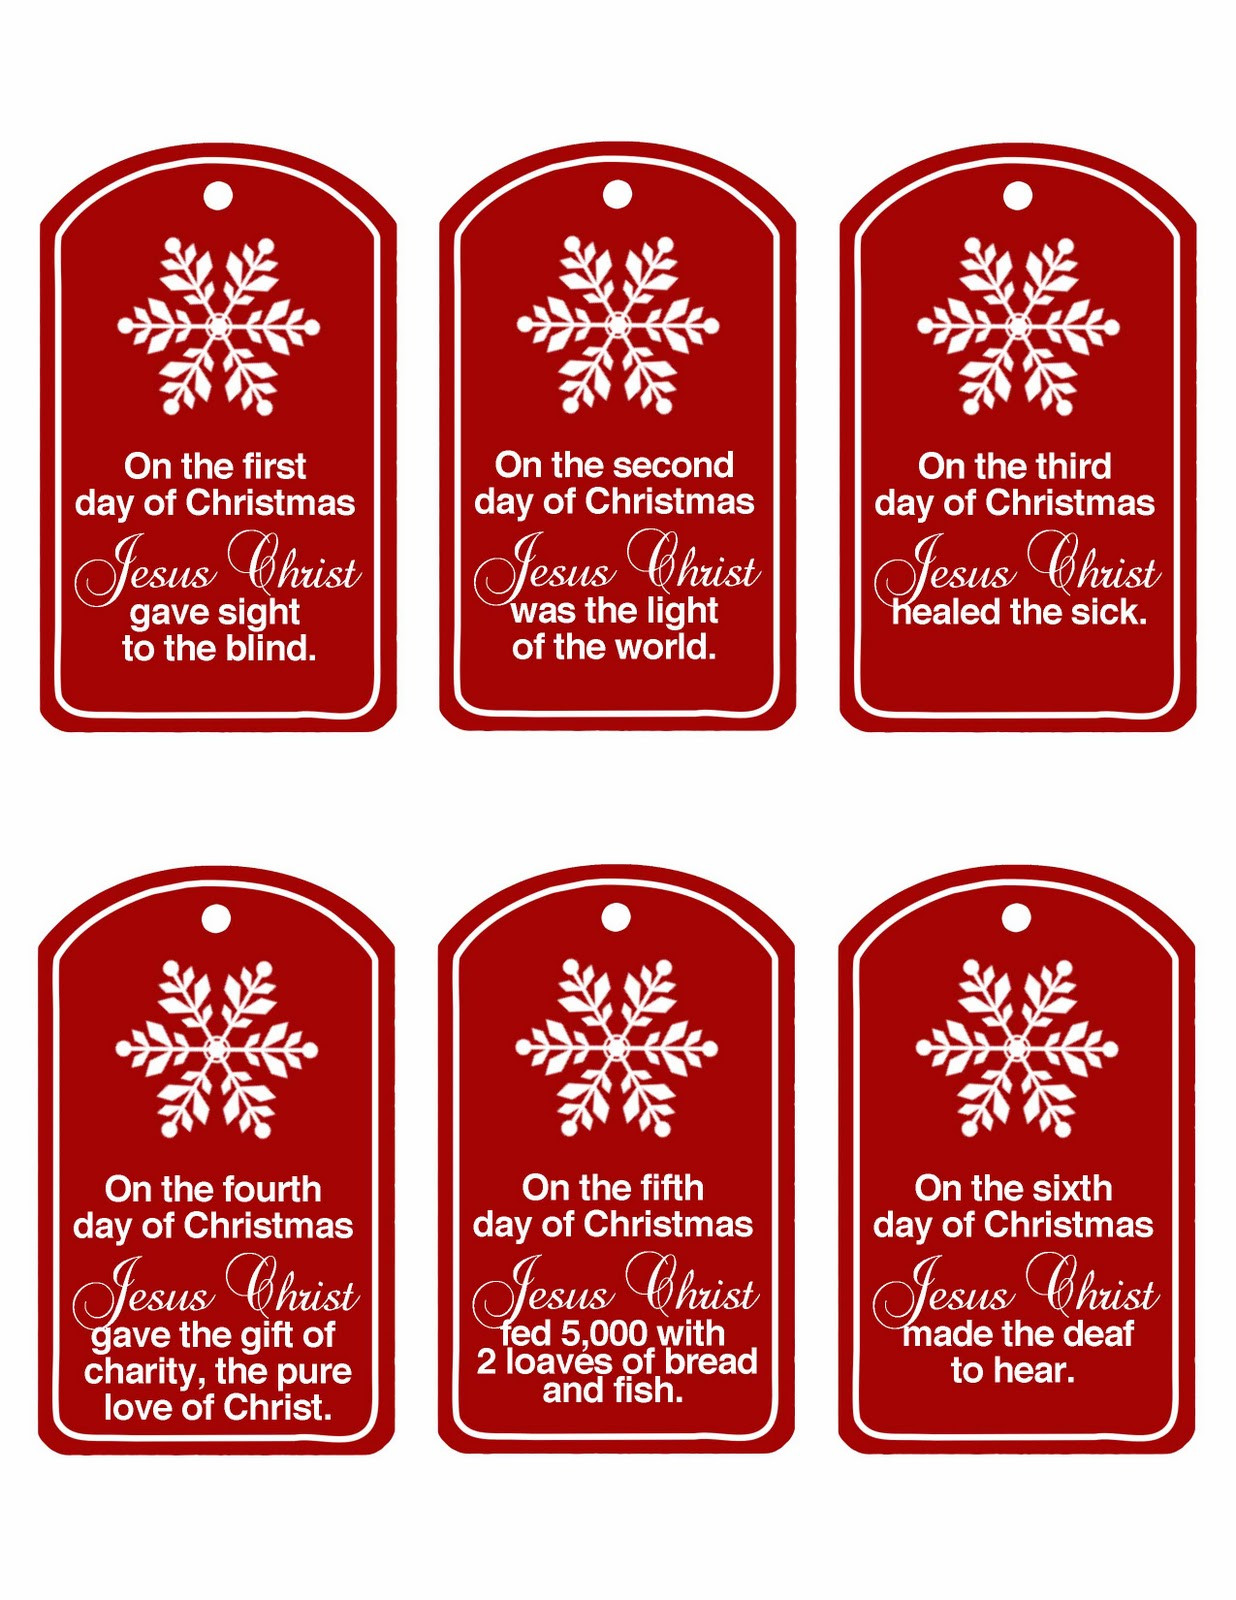 12 Days Of Christmas Gifts
 Family Home Fun Christ Centered 12 Days of Christmas